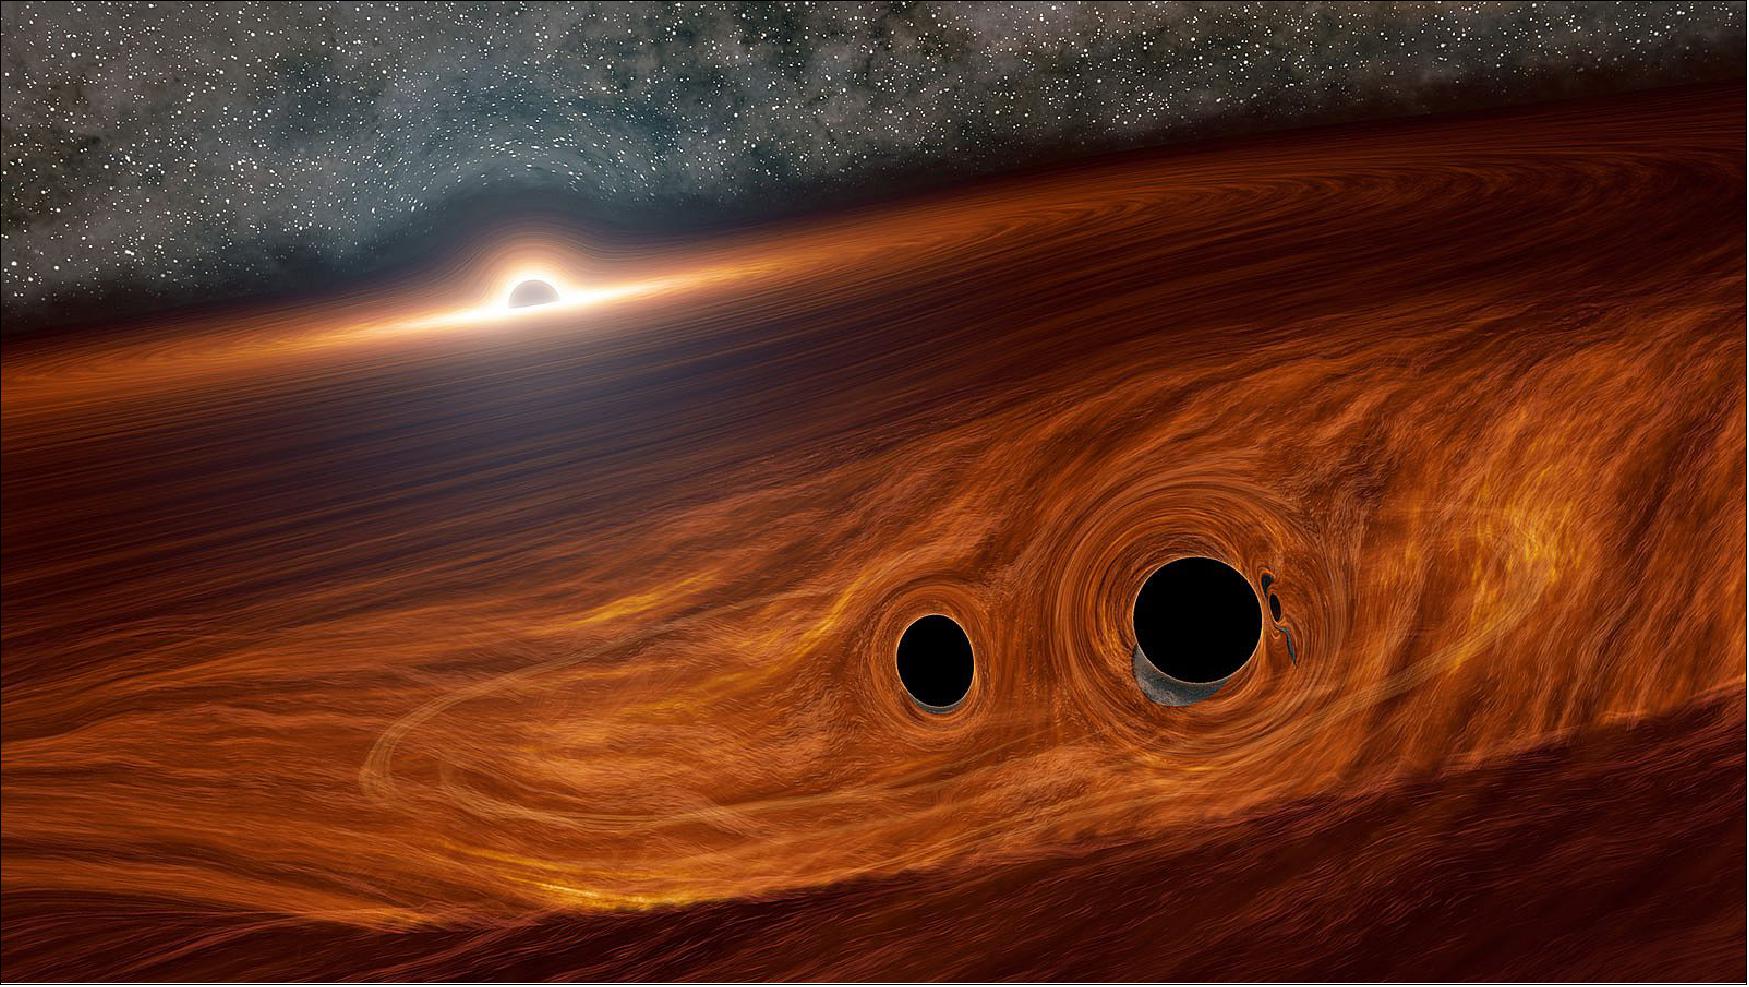 Figure 50: This artist's concept shows a supermassive black hole surrounded by a disk of gas. Embedded in this disk are two smaller black holes that may have merged together to form a new black hole [image credit: Caltech/R. Hurt, IPAC (Infrared Processing and Analysis Center)]